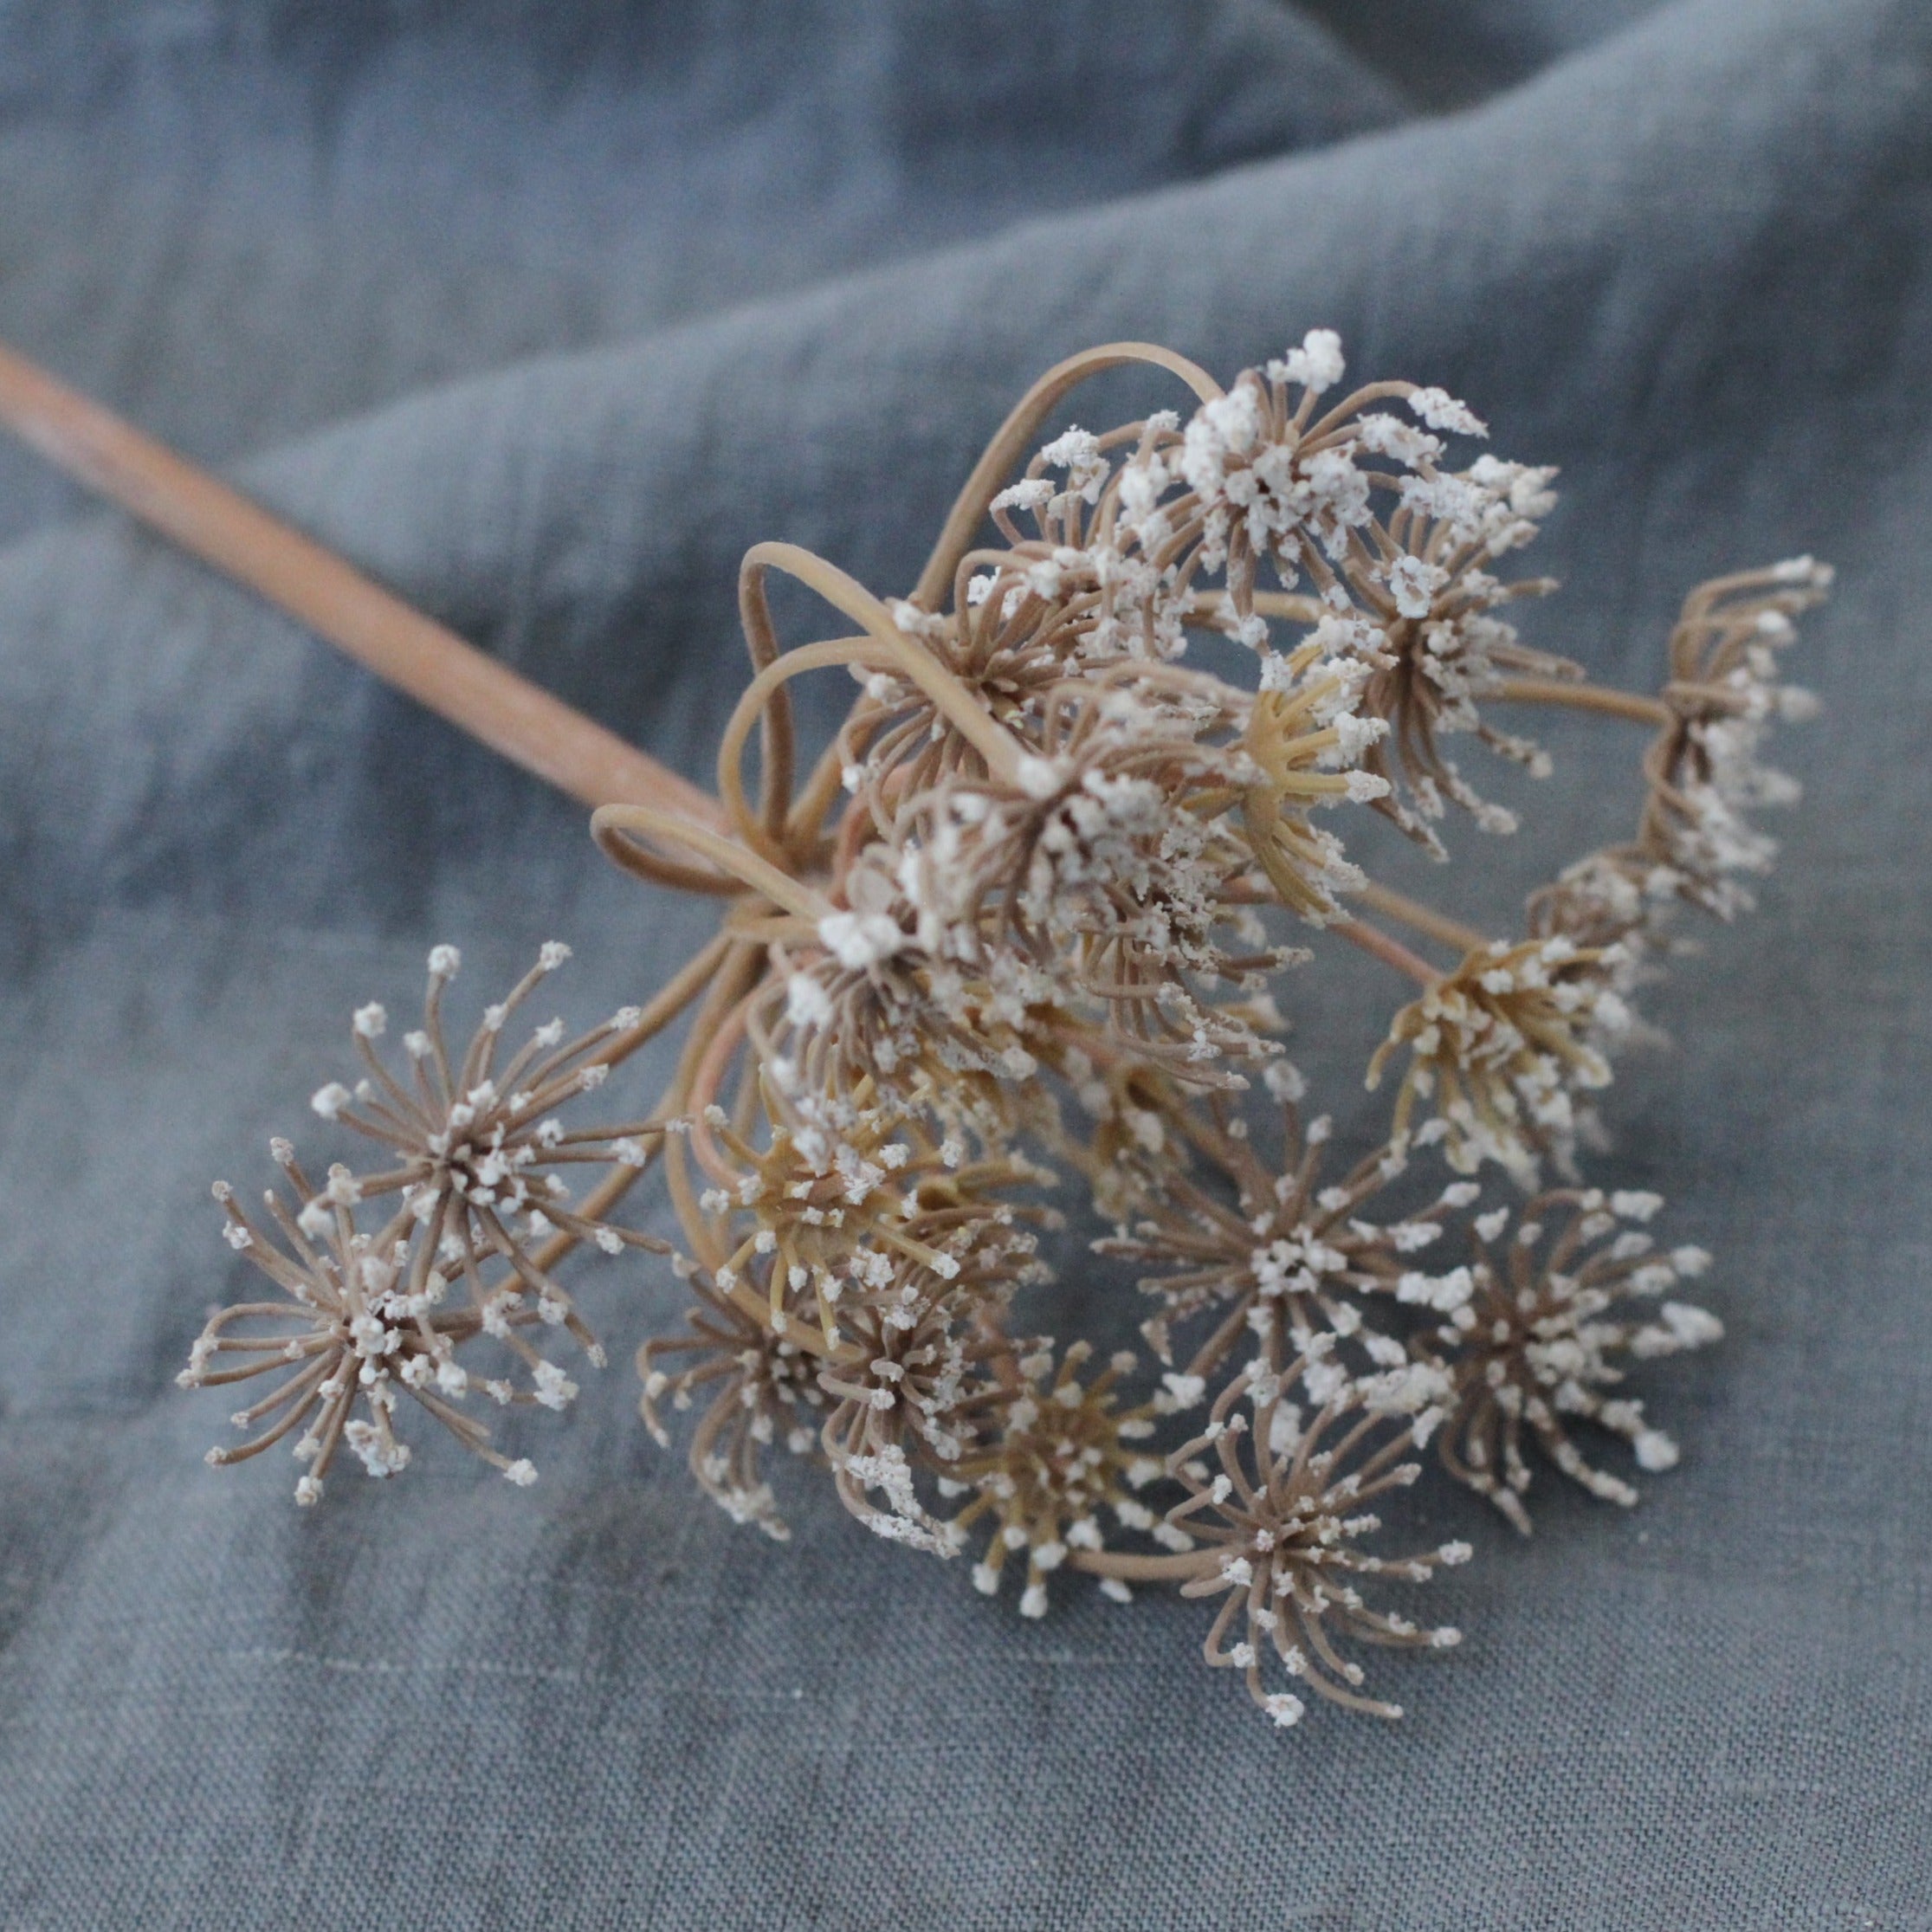 Queen Anne's Lace Stem